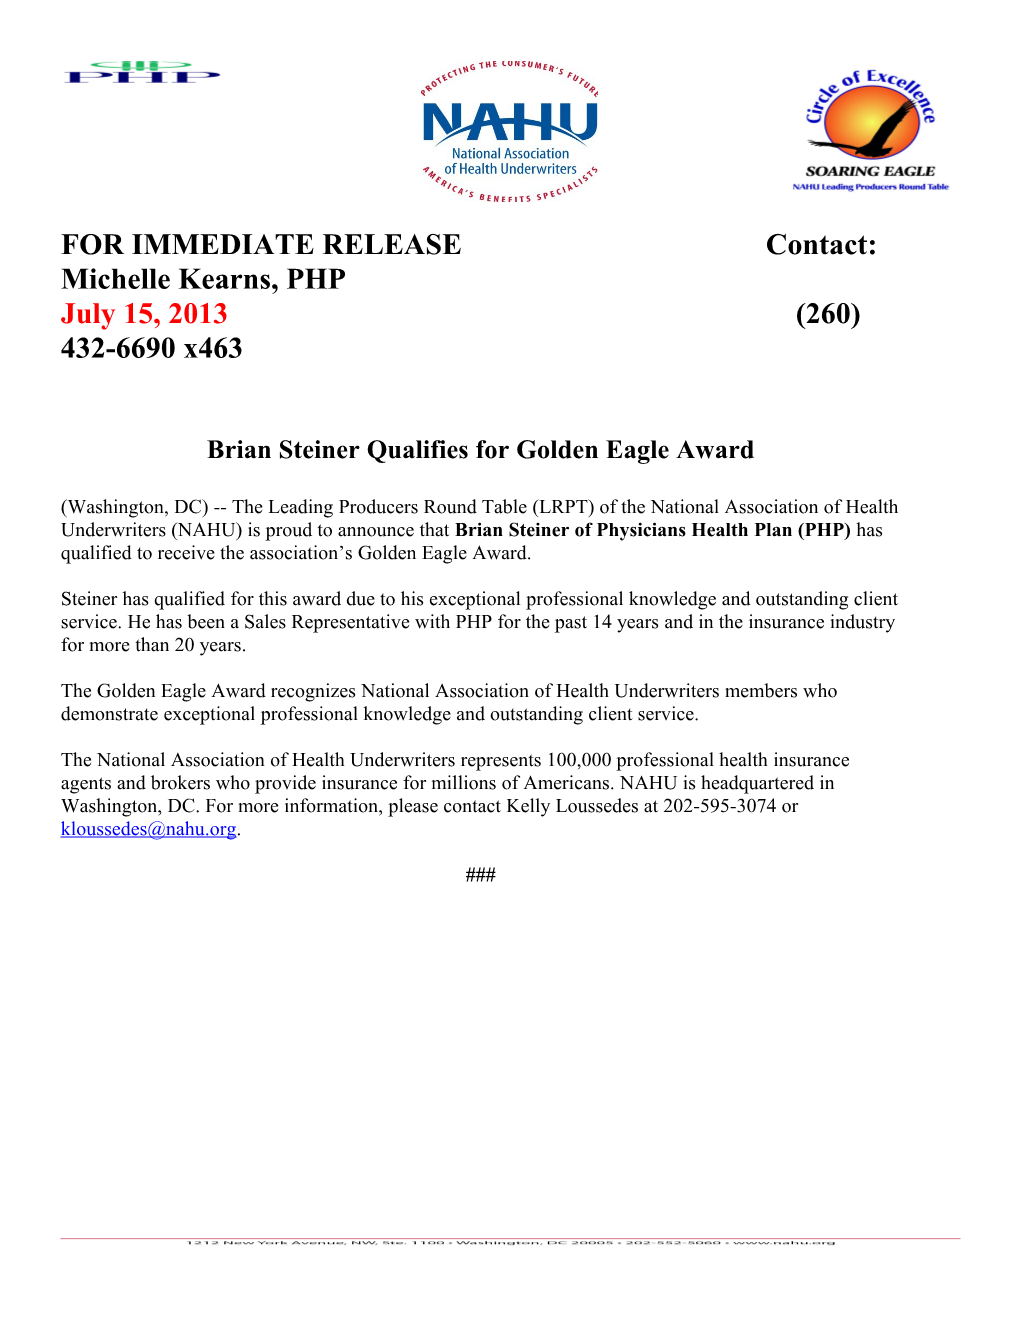 Press Release Template: Qualifies for Soaring Eagle Award